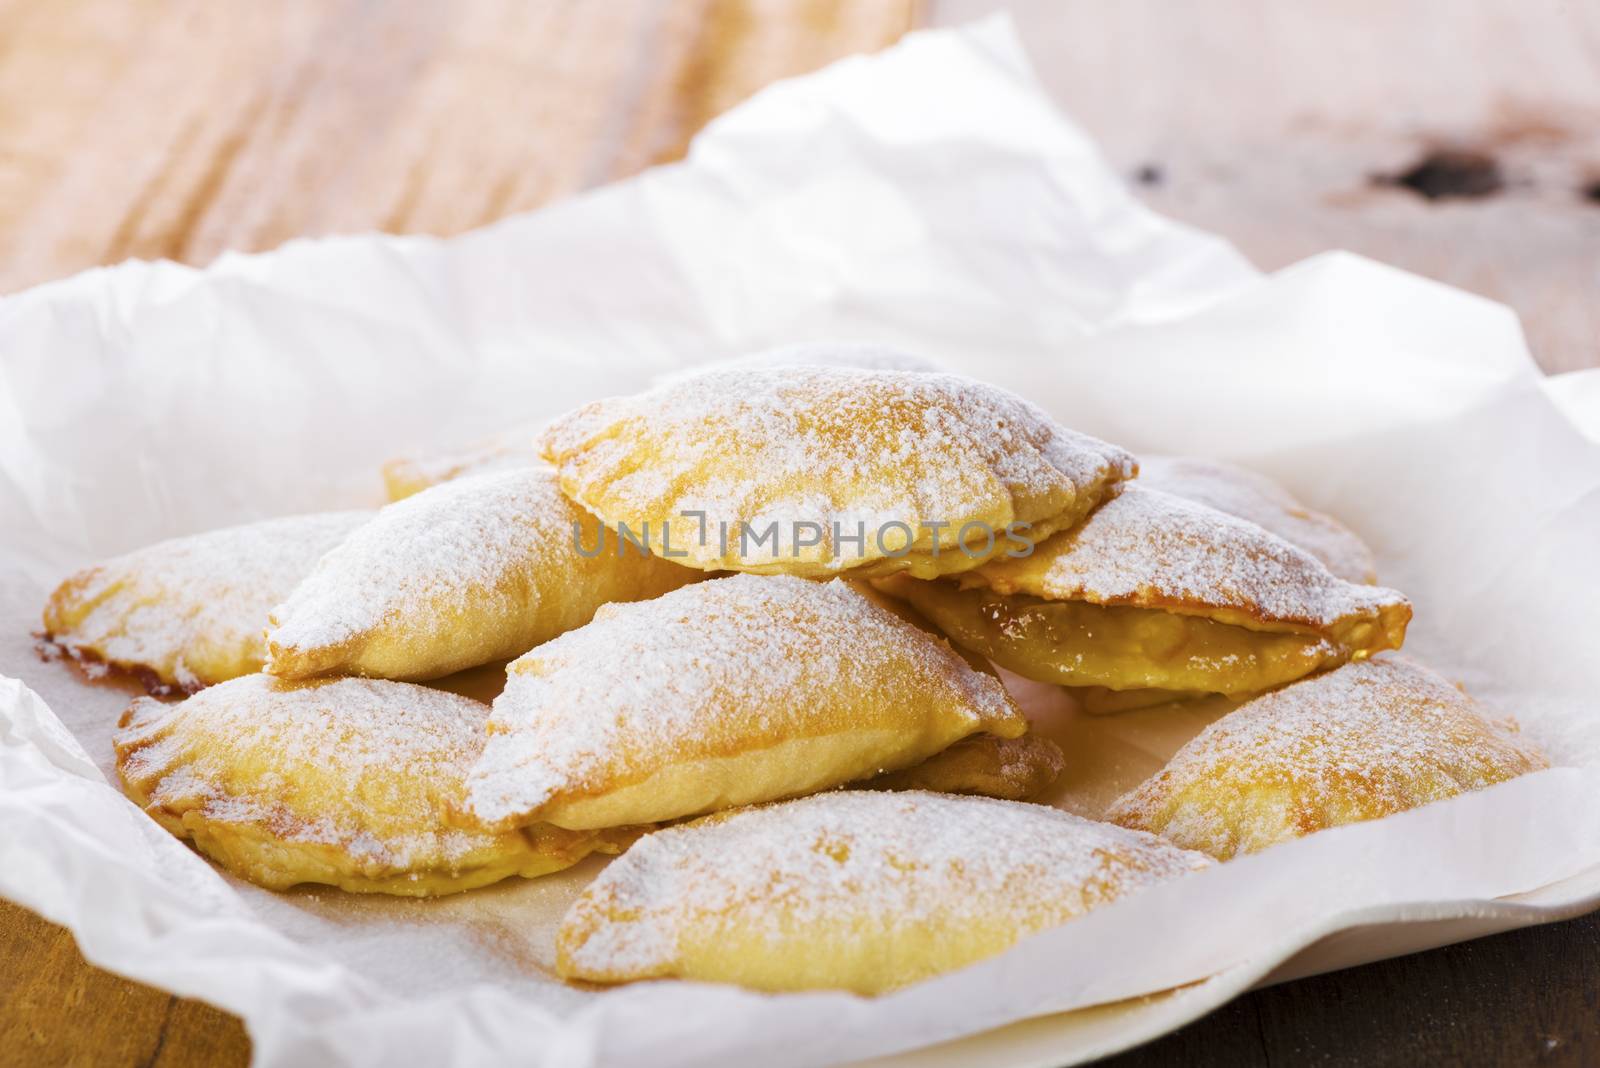 Close up Delicious Cookies with Sugar on Plate with White Paper, Placed on Wooden Table.